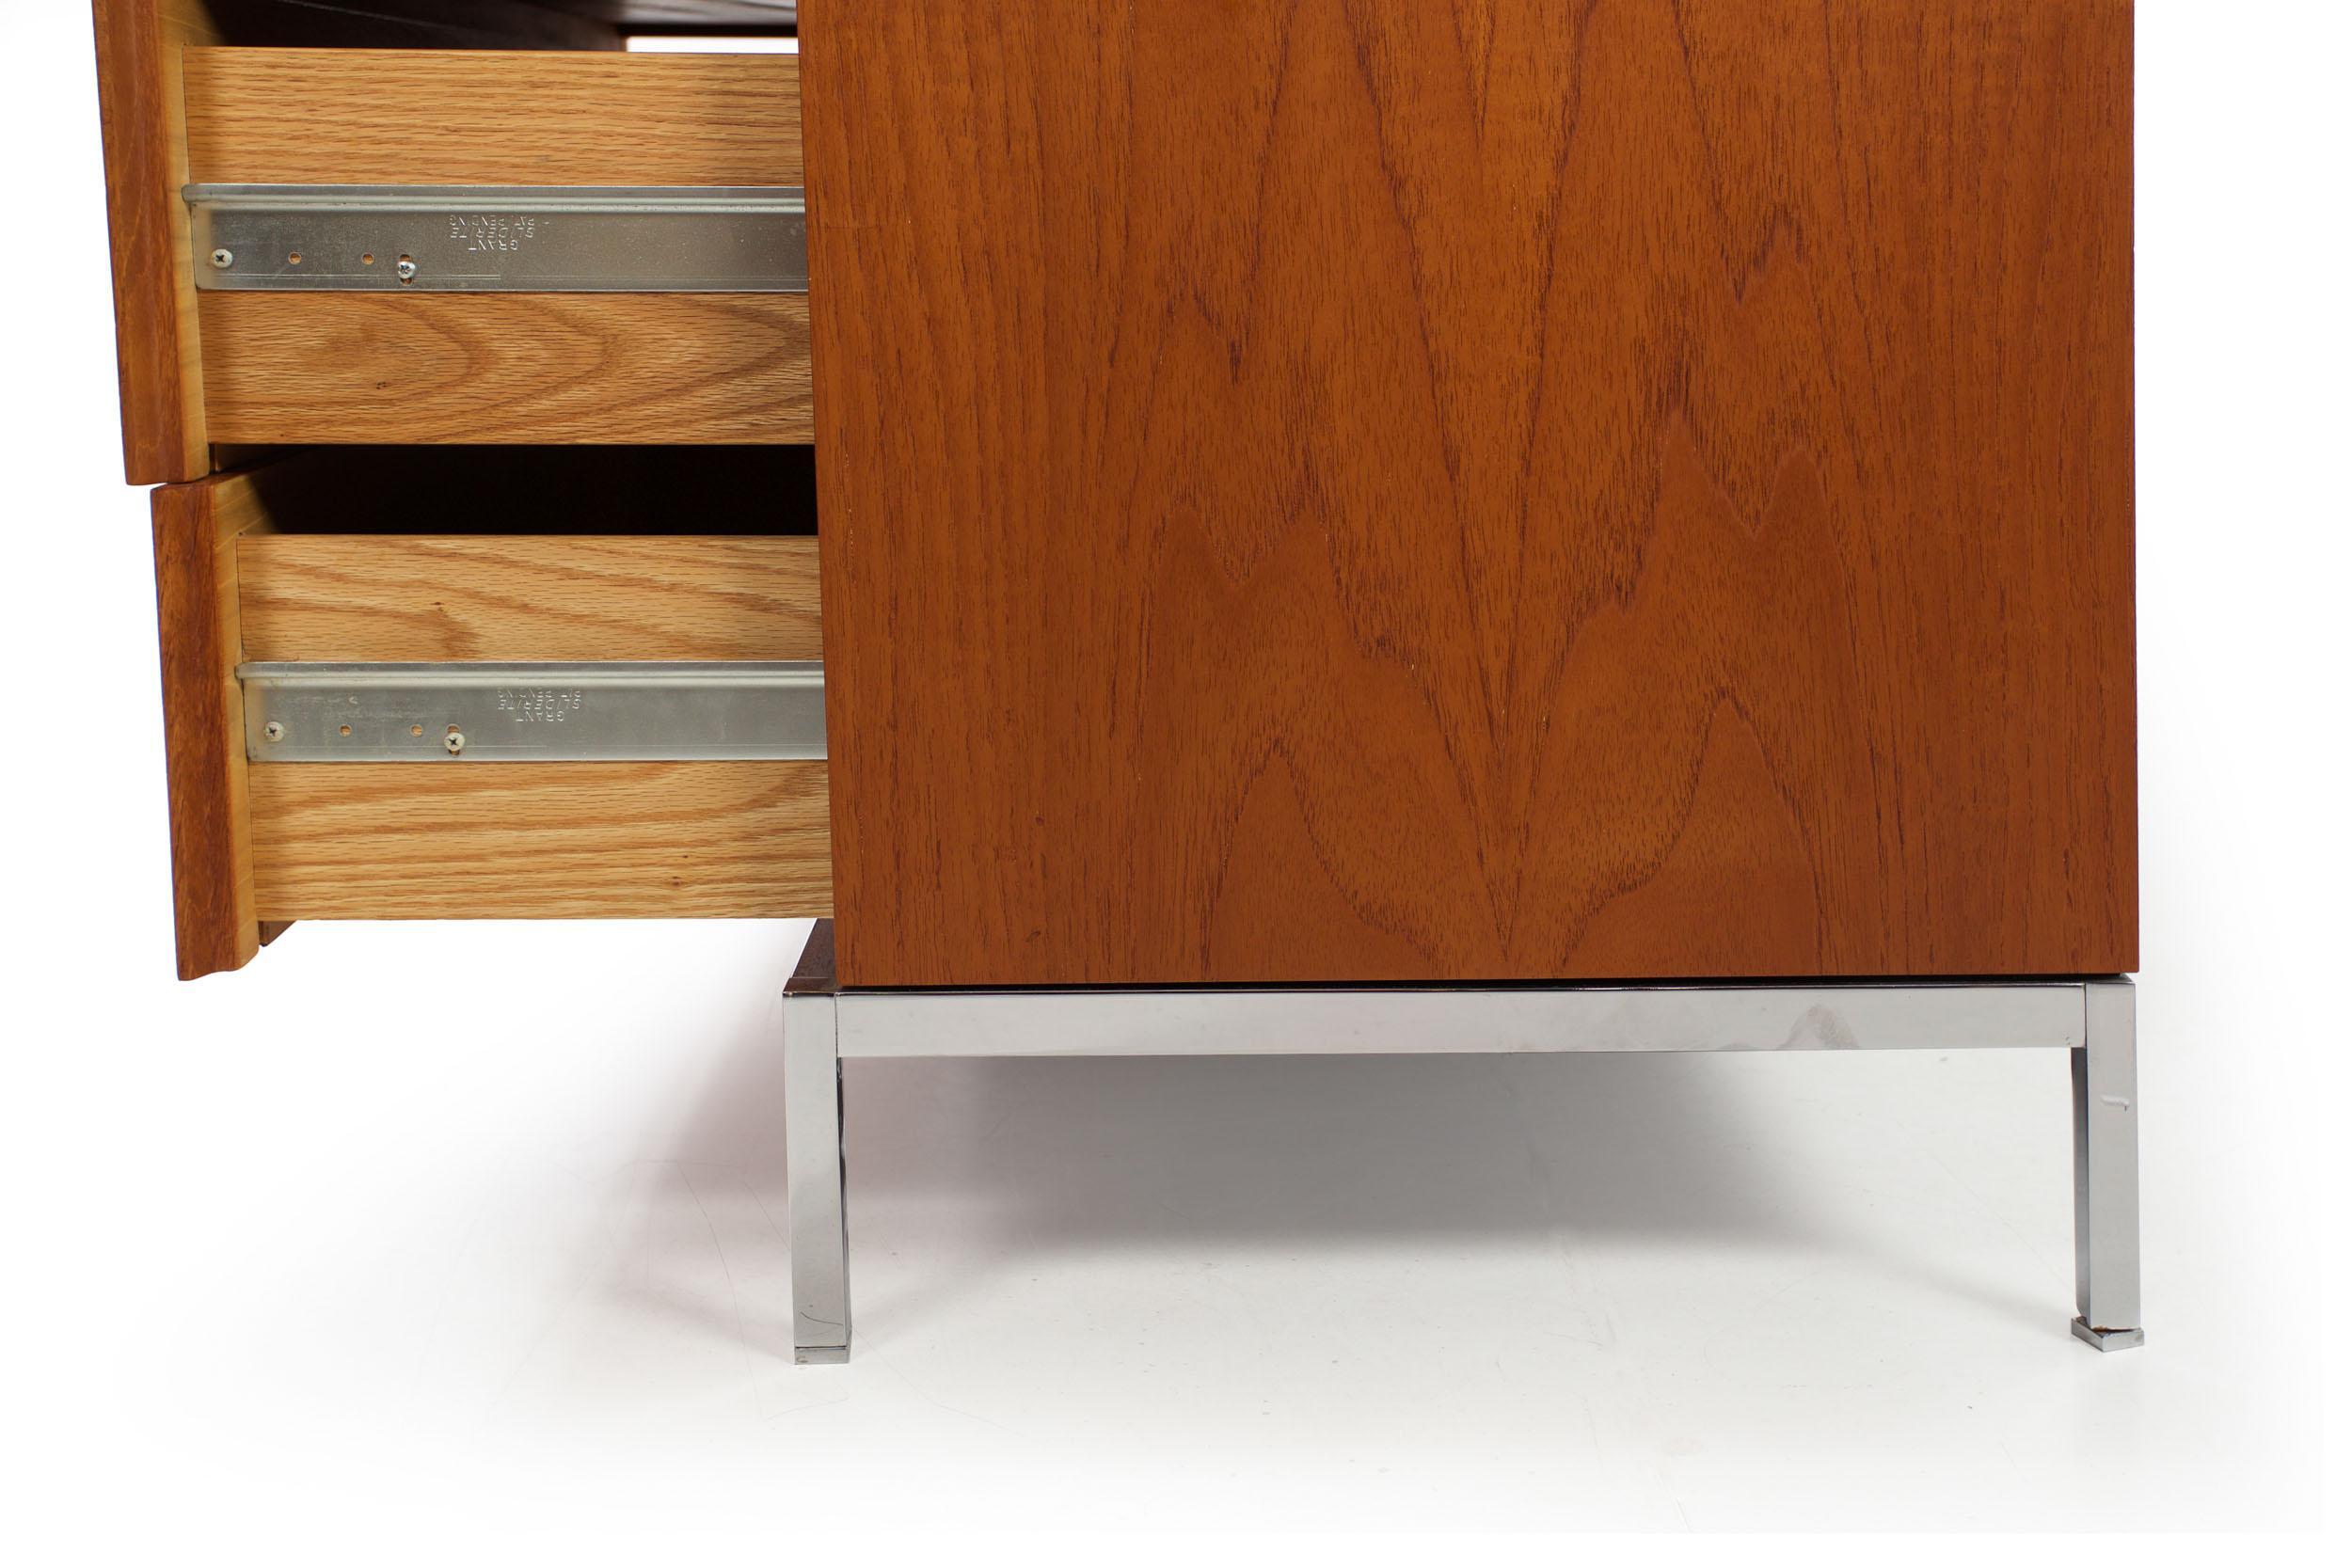 Knoll Mid-Century Modern Teak and Chrome Double Chest Credenza, circa 1970 For Sale 2